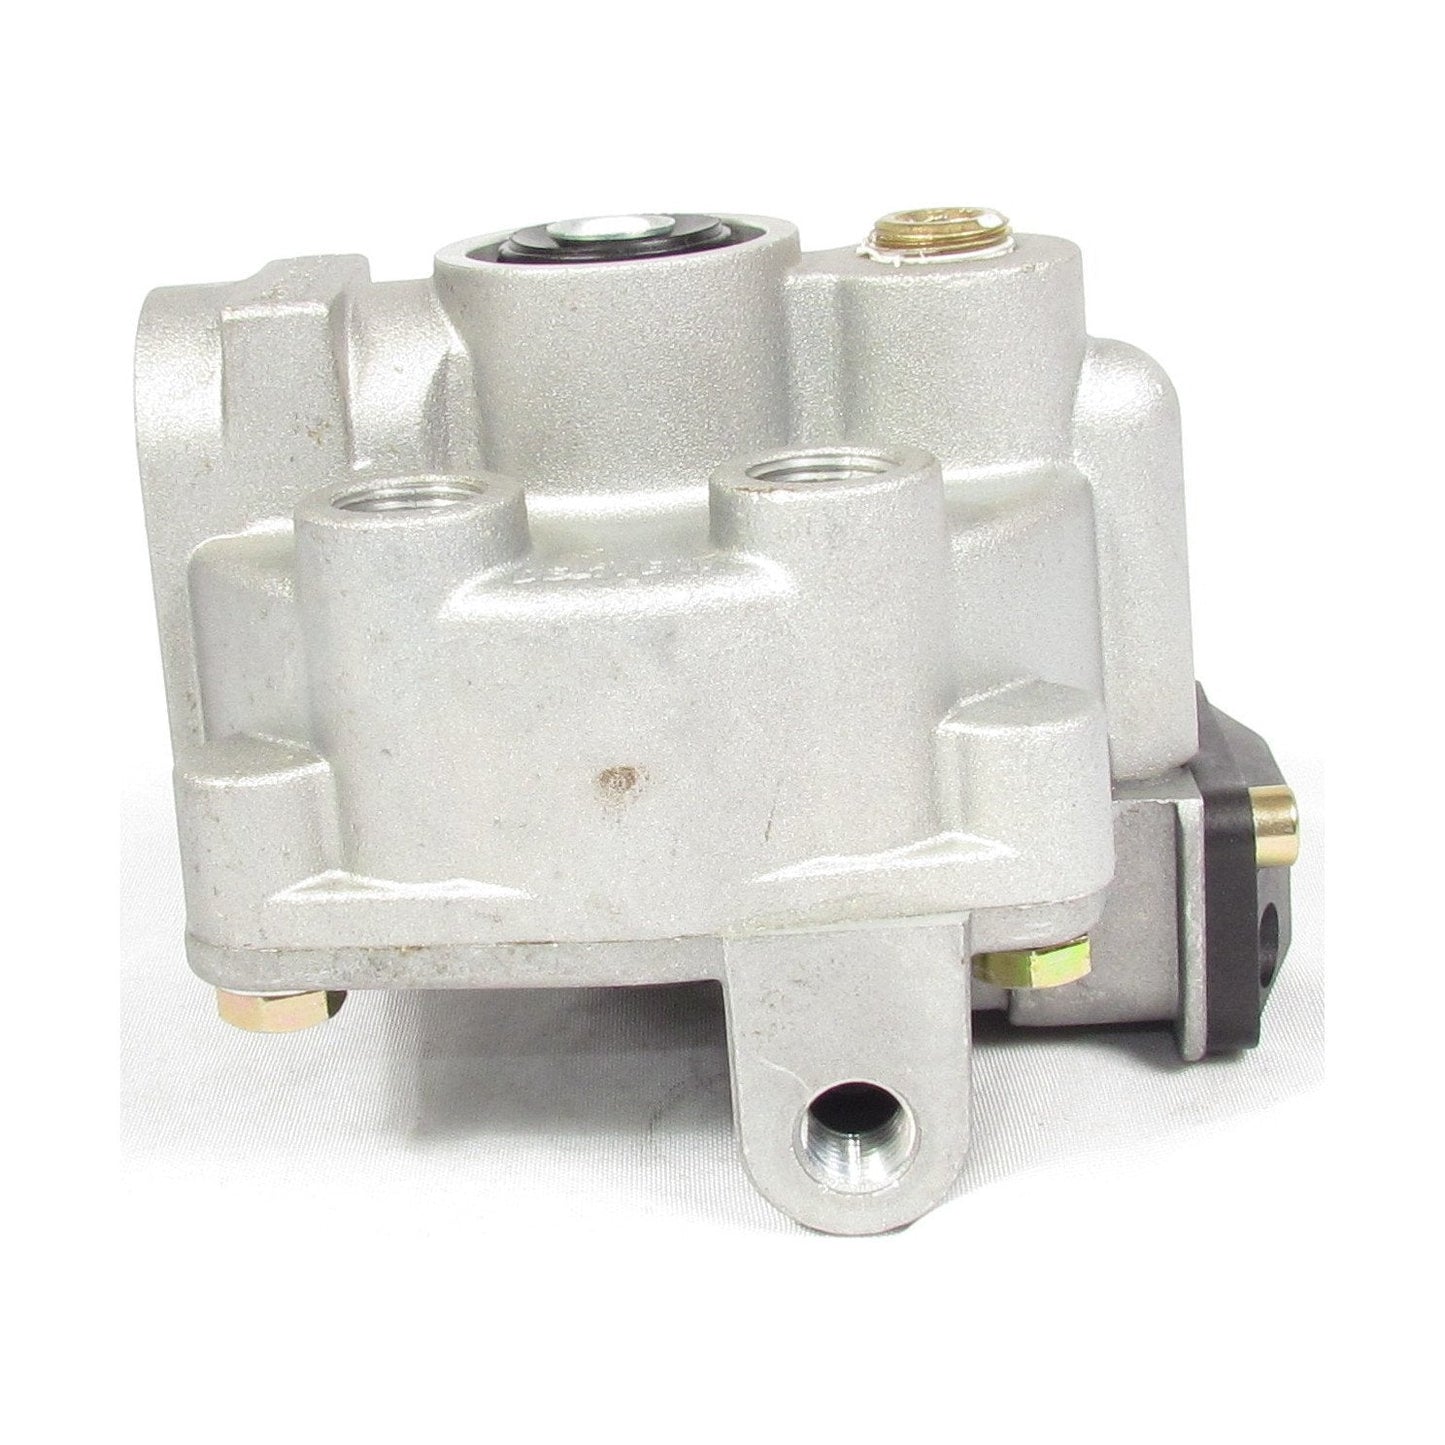 F224701 | EMERGENCY RELAY VALVE | Replace KN30400 | LEV-3610